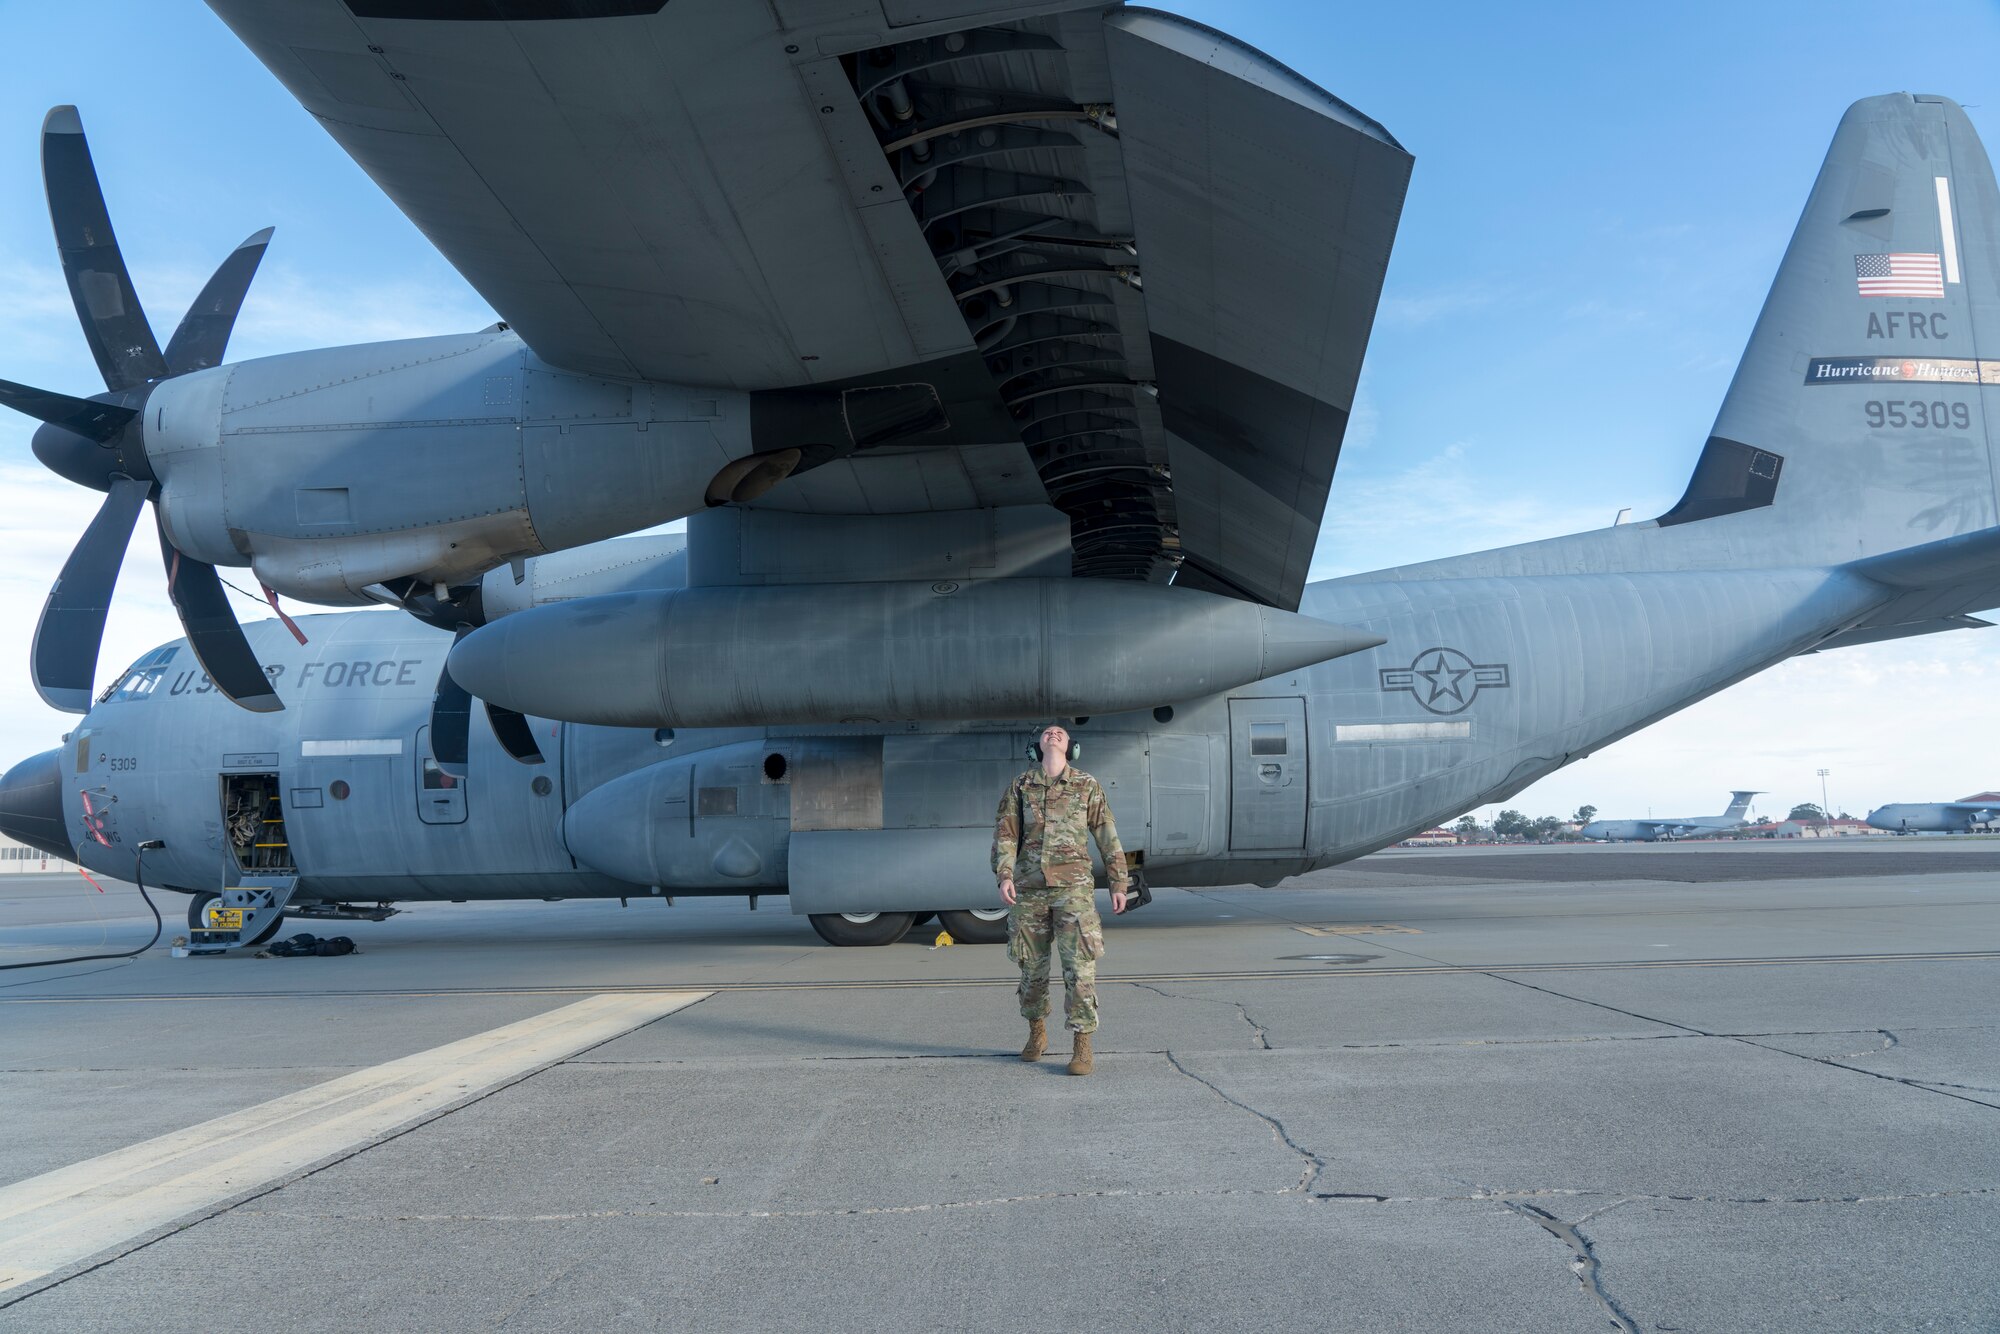 Tech. Sgt. Victoria Kinman, 403rd Aircraft Maintenance Squadron crew chief, inspects the wings of a WC-130J Super Hercules aircraft from the 53rd Weather Reconnaissance on the flightline prior to an atmospheric river mission Jan. 27 at Travis Air Force Base, Calif. The Hurricane Hunters are slated to perform “AR recon” from January through March. Scientists led by Scripps Institution of Oceanography at University of California, San Diego, in partnership with the 53rd WRS, National Oceanic and Atmospheric Aviation’s National Weather Service, Office of Marine and Aviation Operations, will be on standby to fly through these ARs over the Pacific to gather data to improve forecasts. (U.S. Air Force photo by Tech. Sgt. Christopher Carranza)